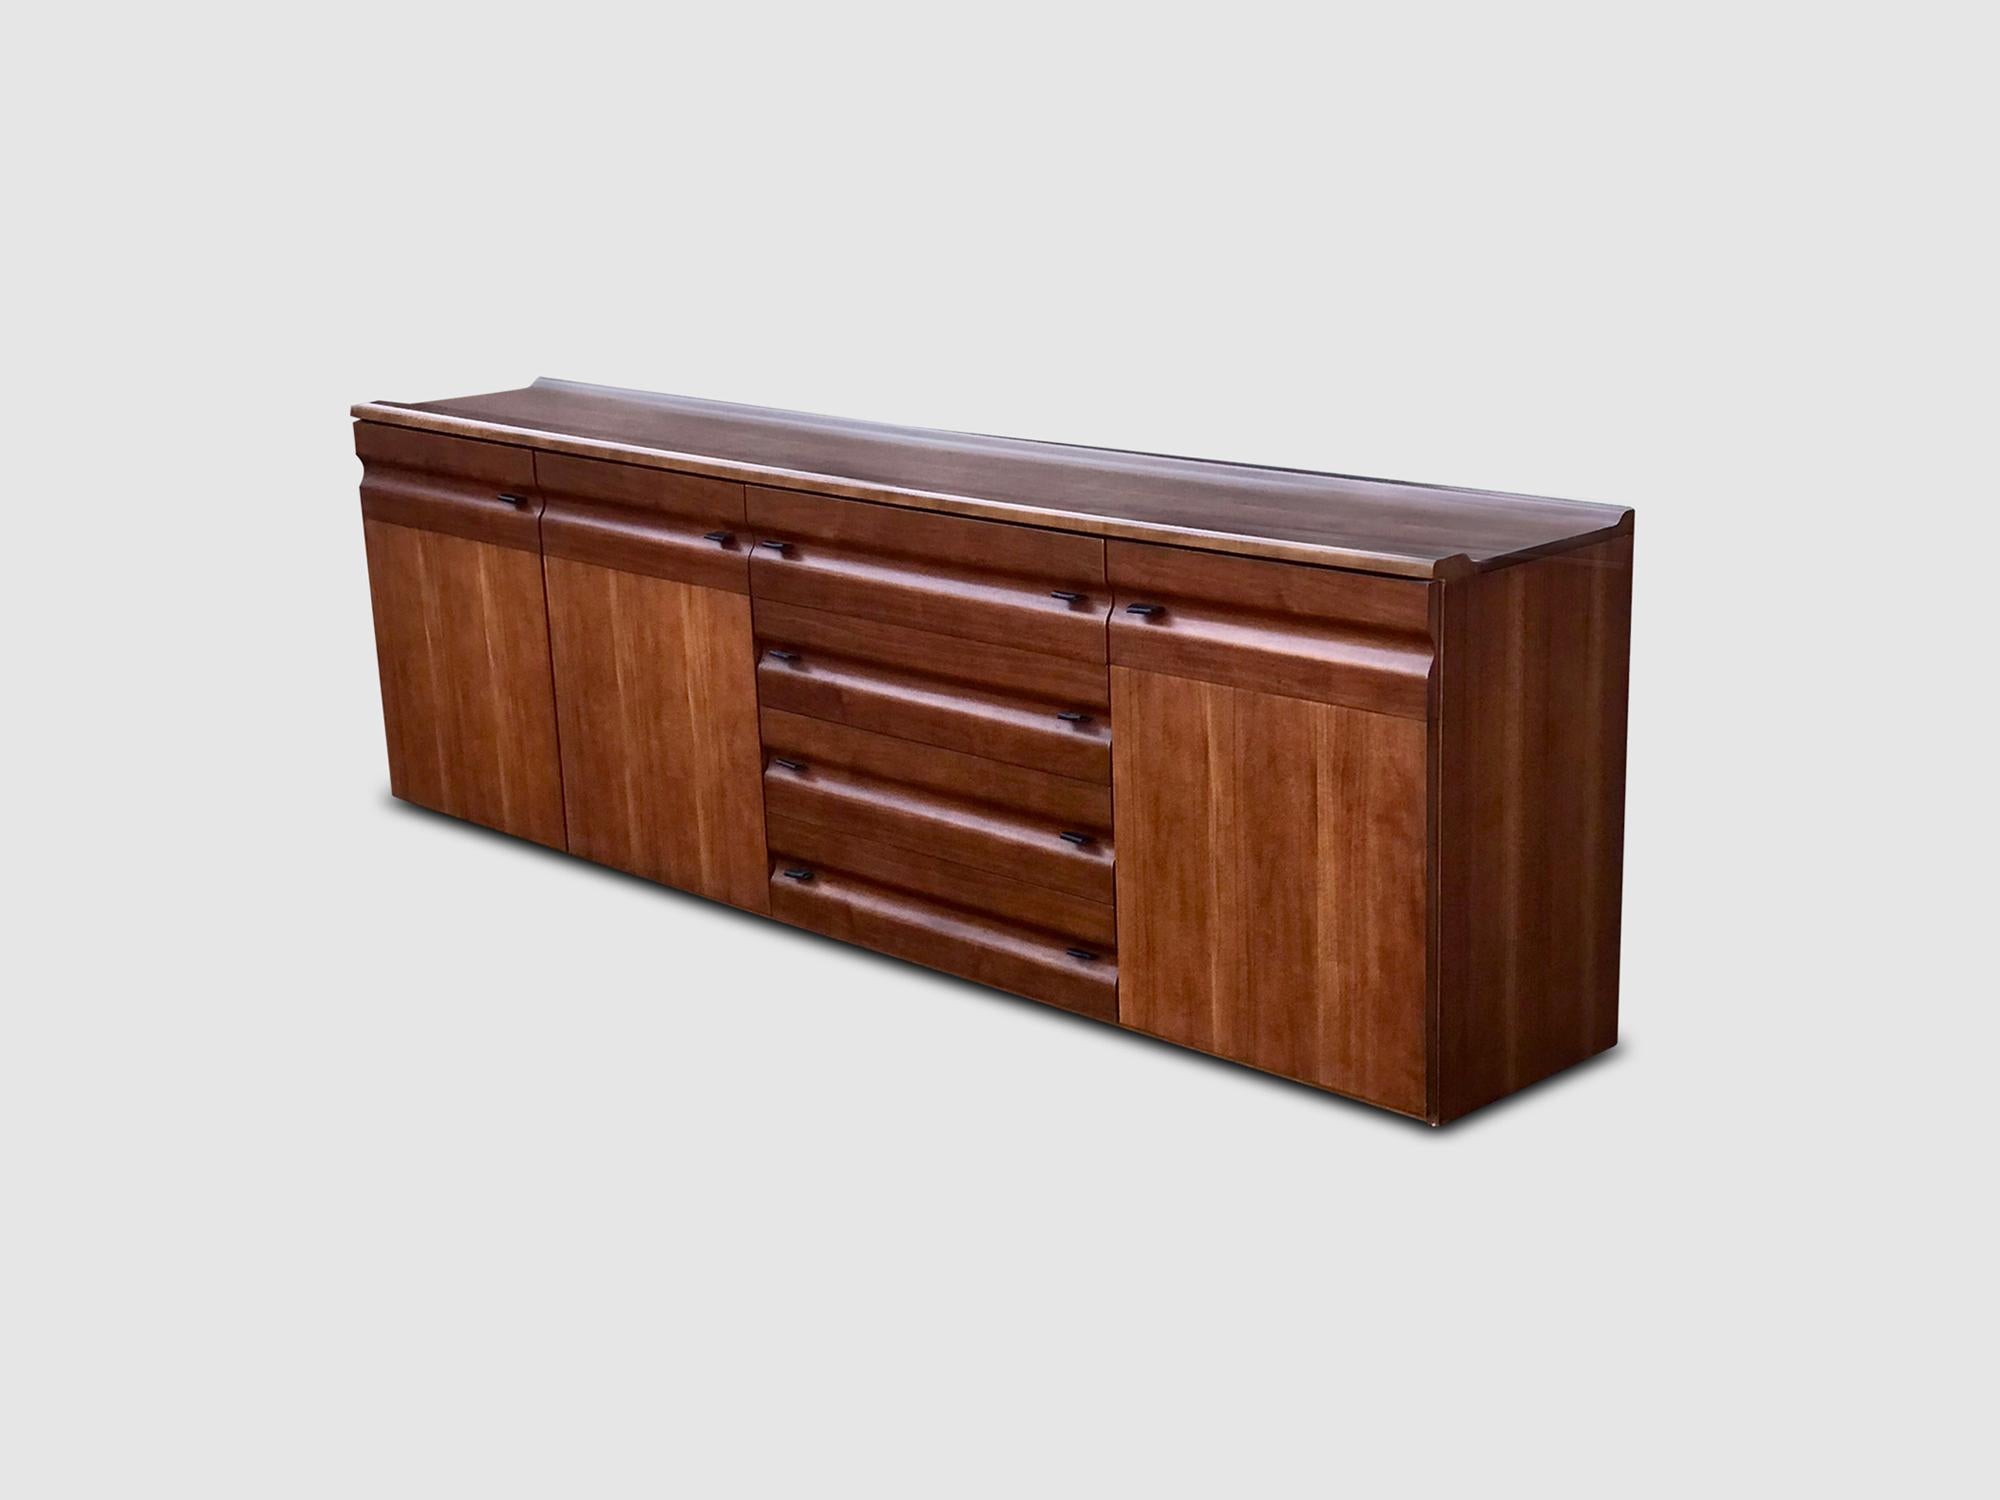 Impressive Sculpted Walnut and Leather Credenza Gavina, Italy, 1970s For Sale 1